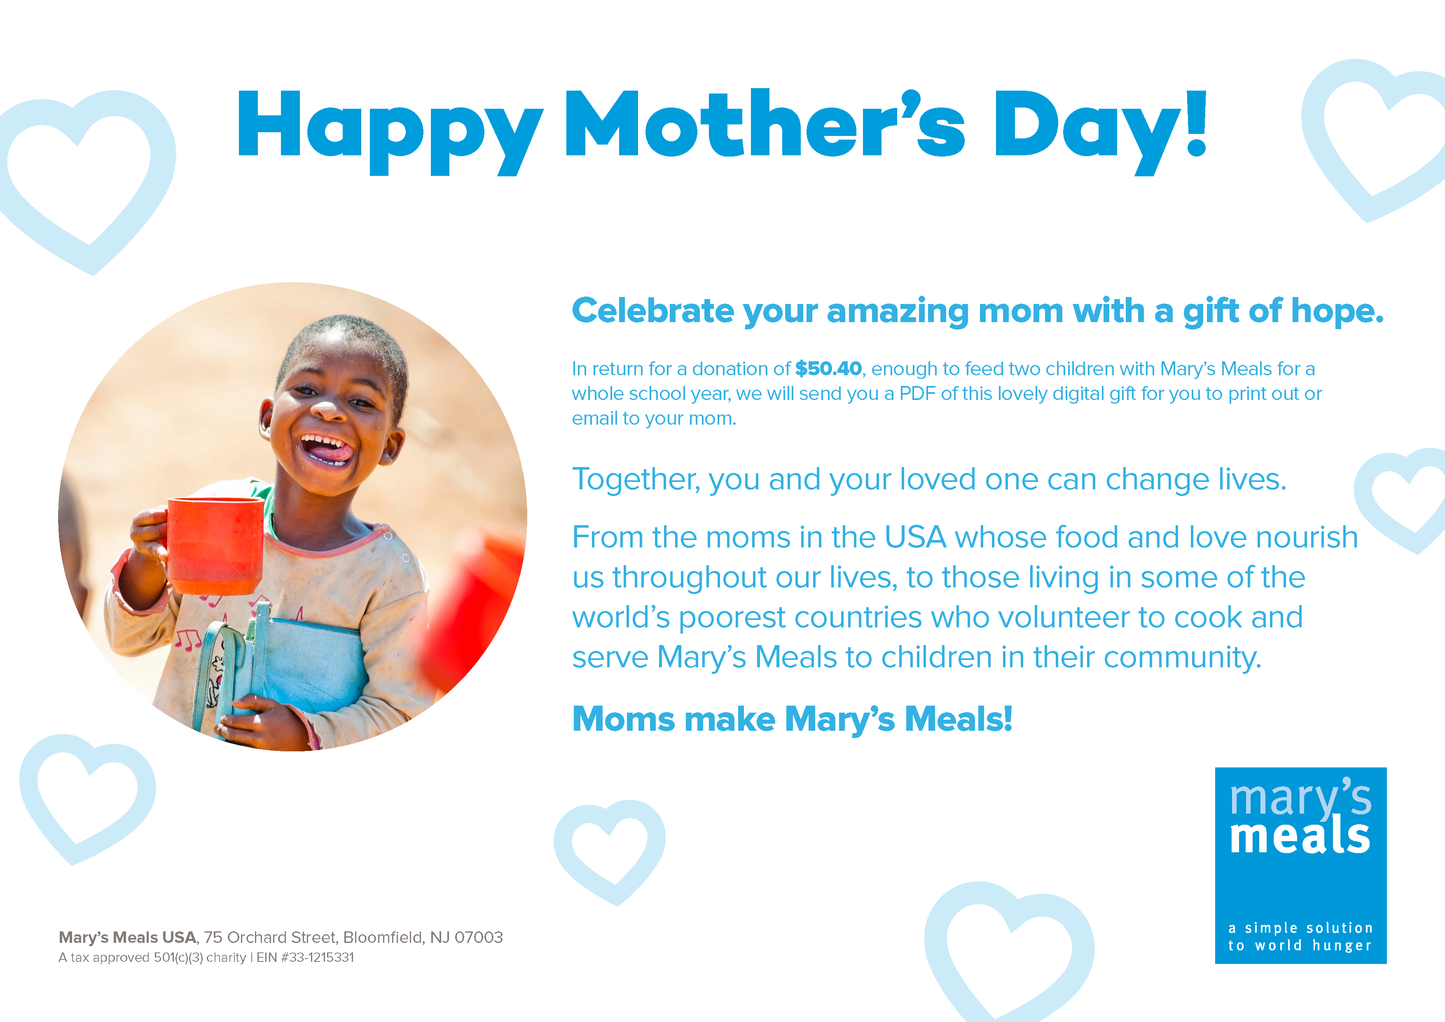 Mother's Day digital gift - feed two children for a year